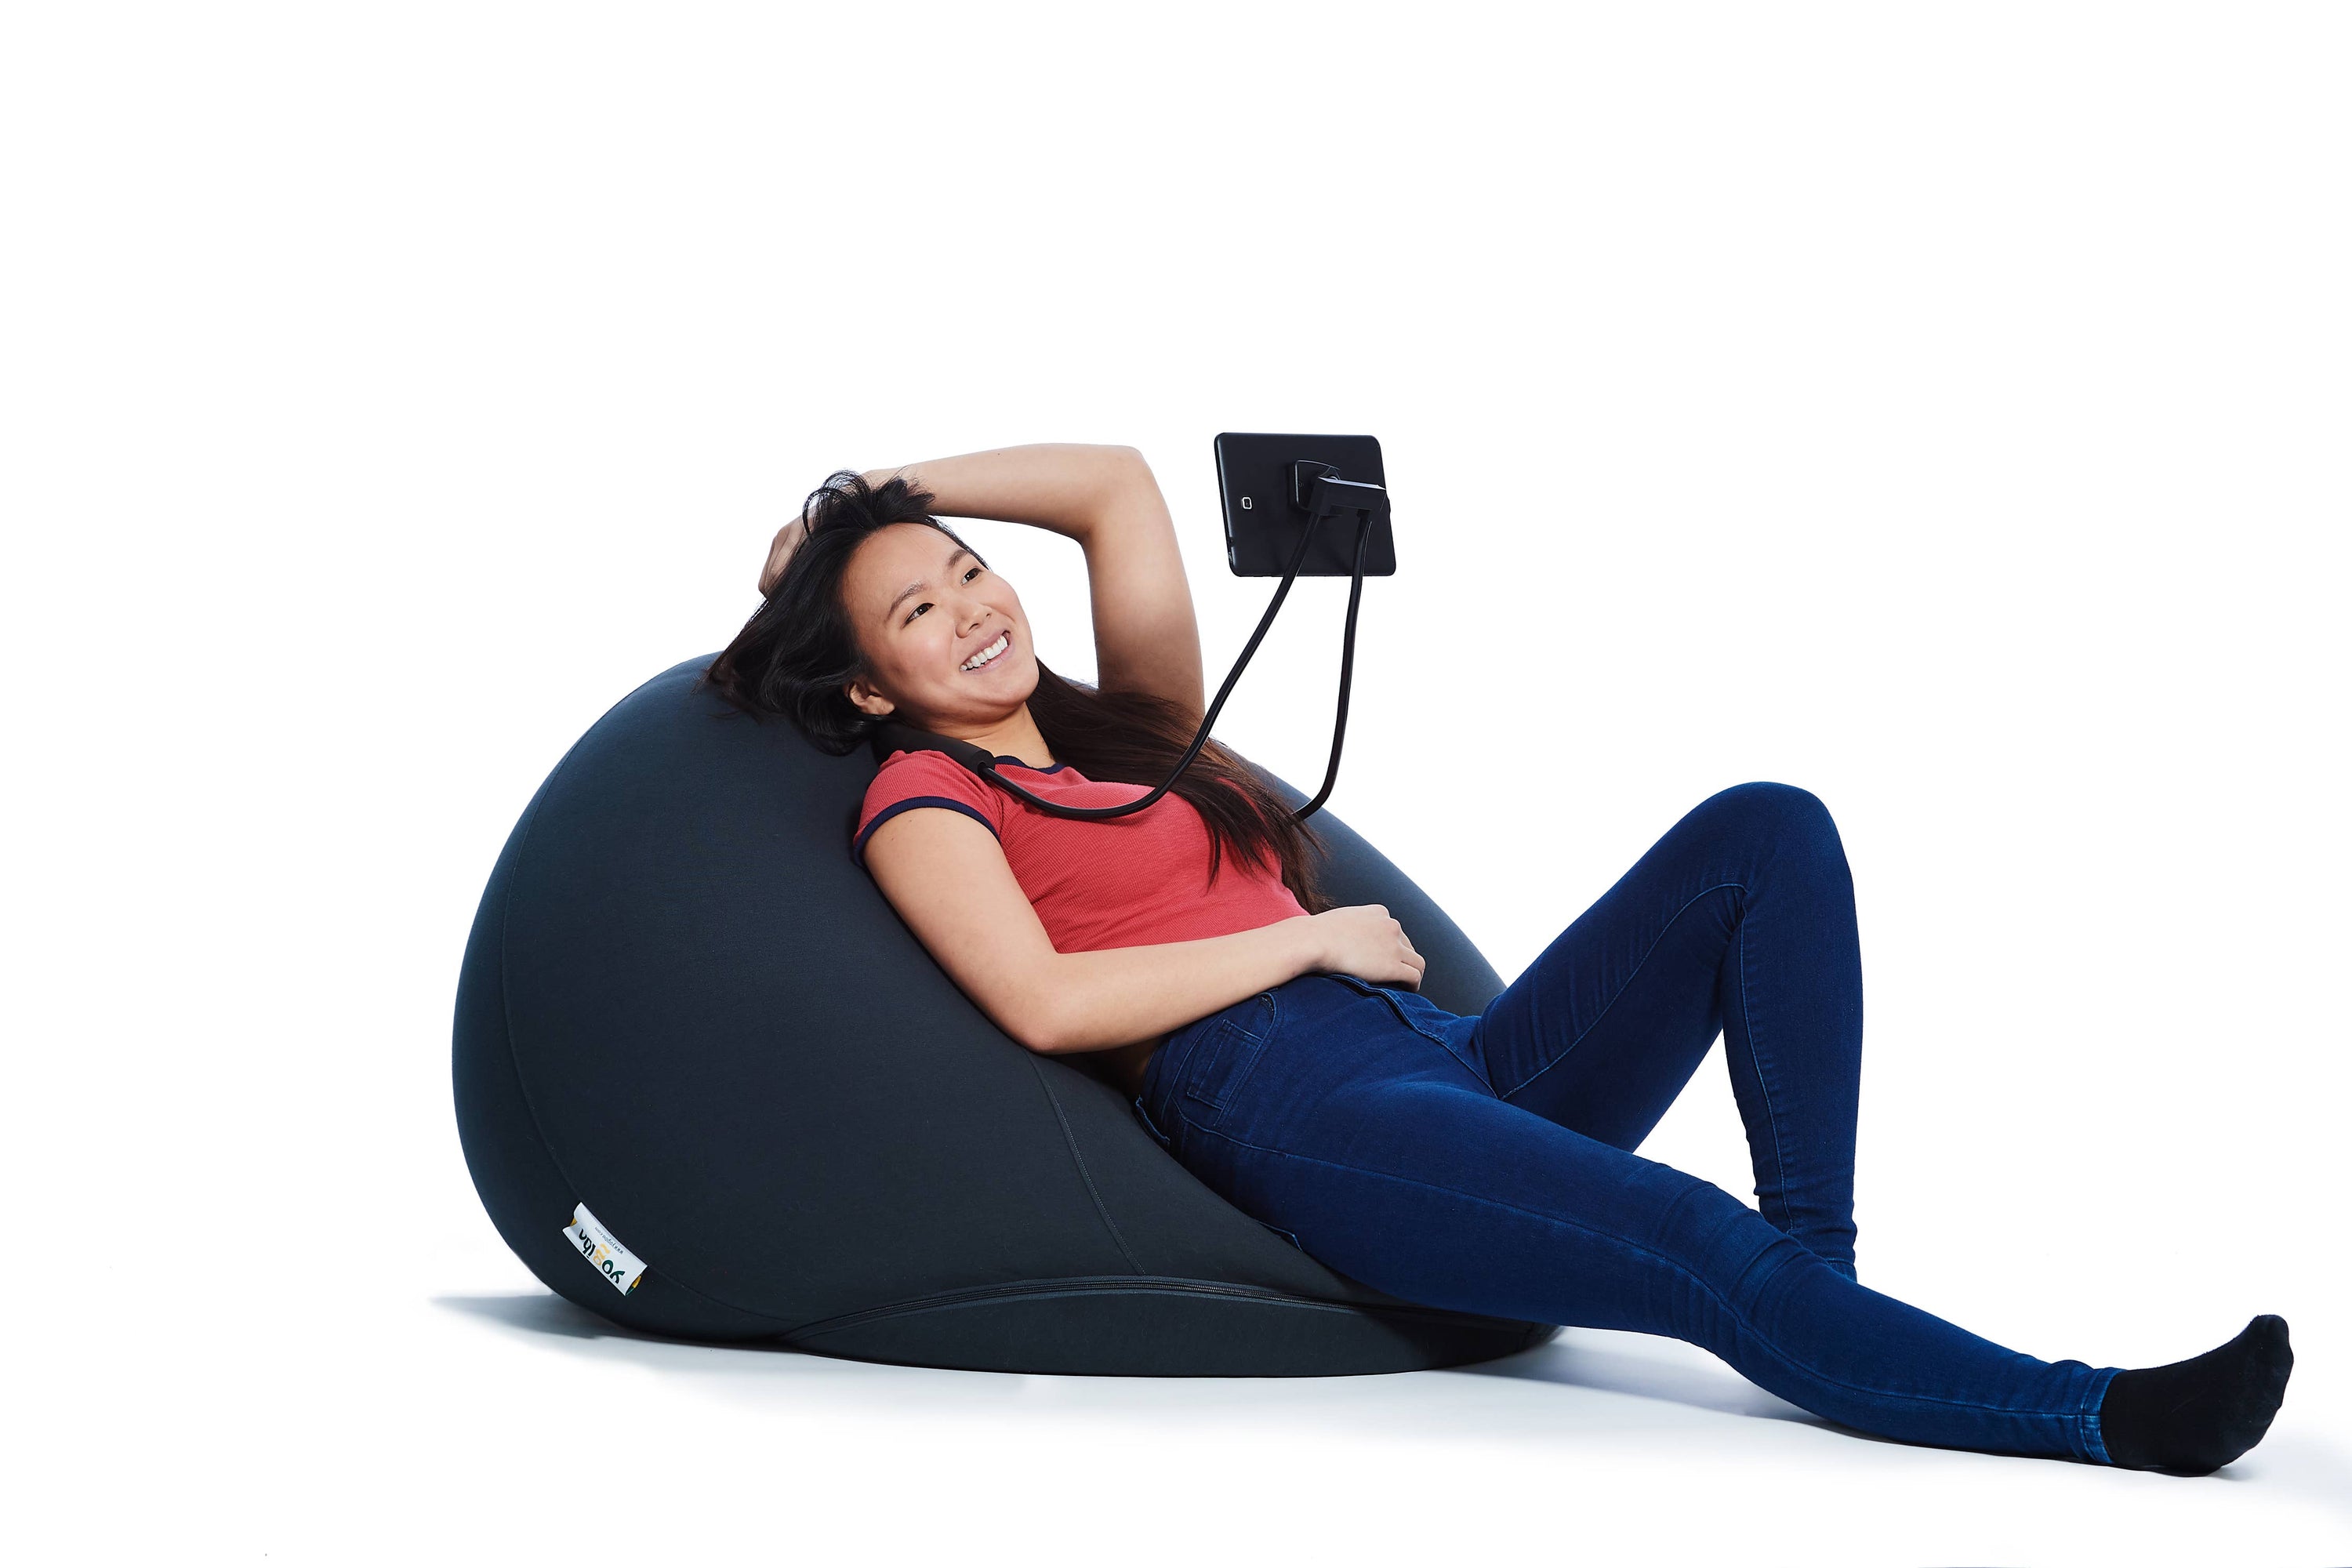 A person with medium light skin tone and long dark hair relaxes on a Yogibo while wearing a Grippibo Hands Free Device Holder.